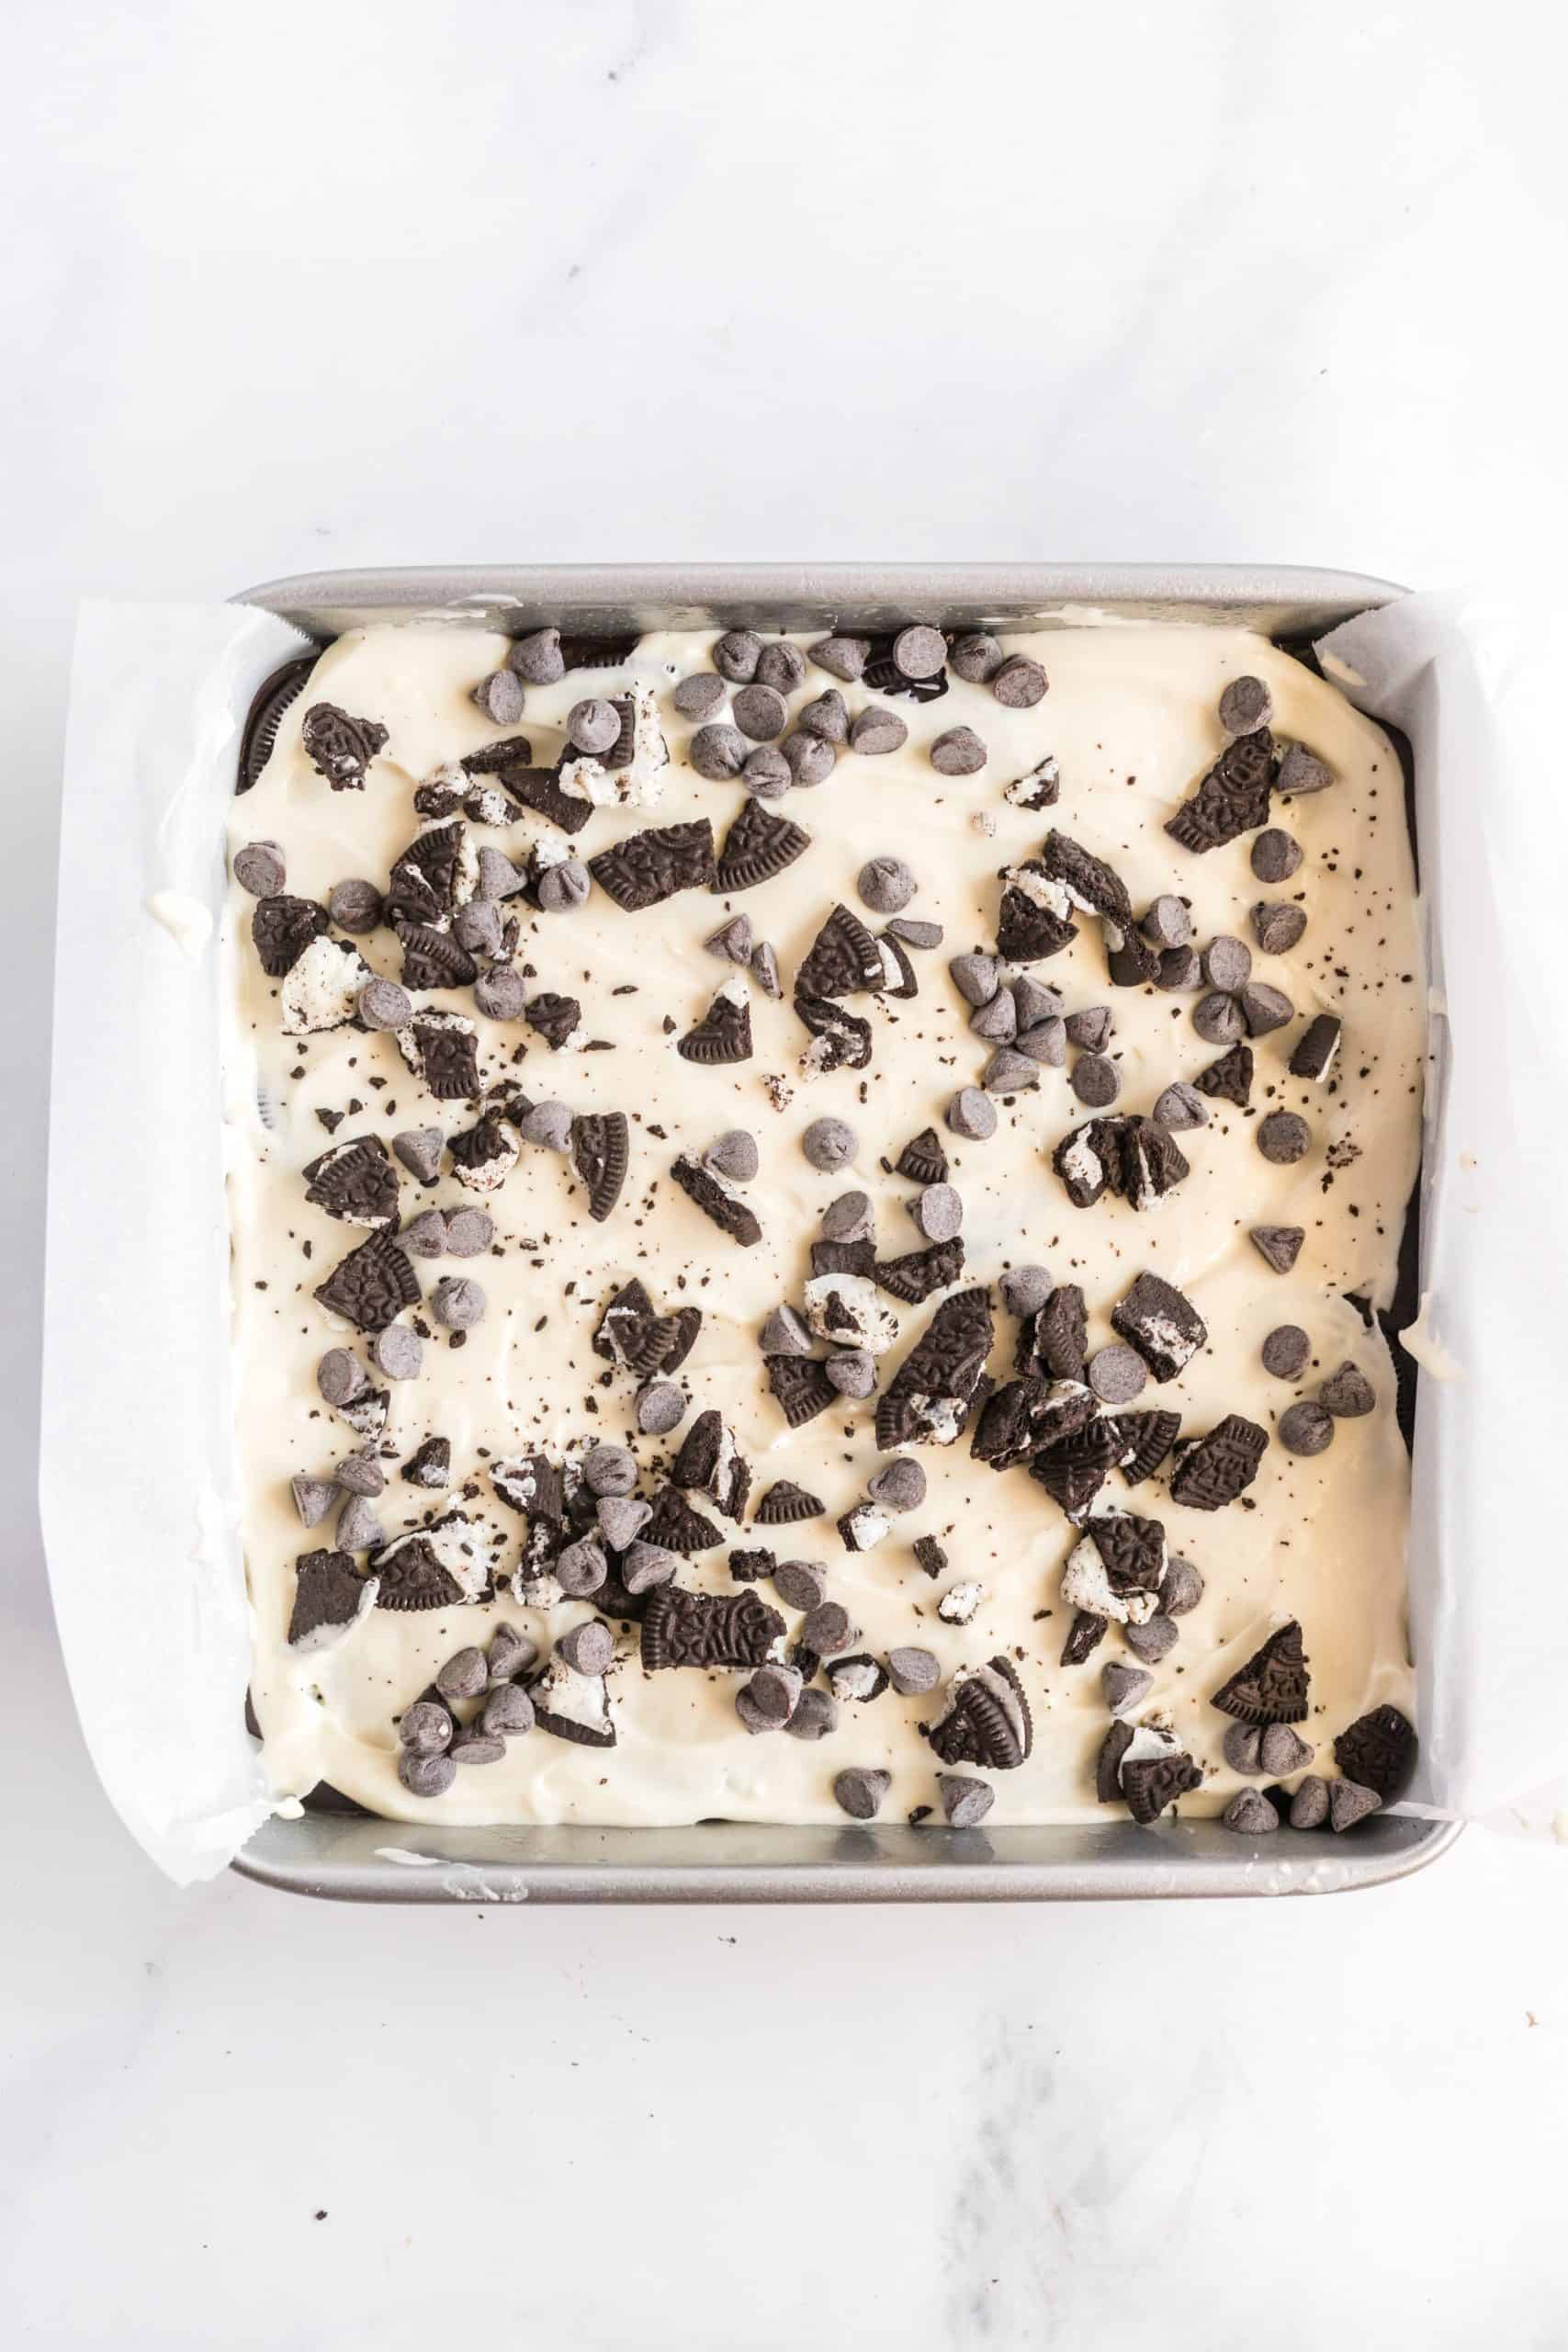 Chopped Oreos and chocolate chips topping cheesecake layer in baking pan.